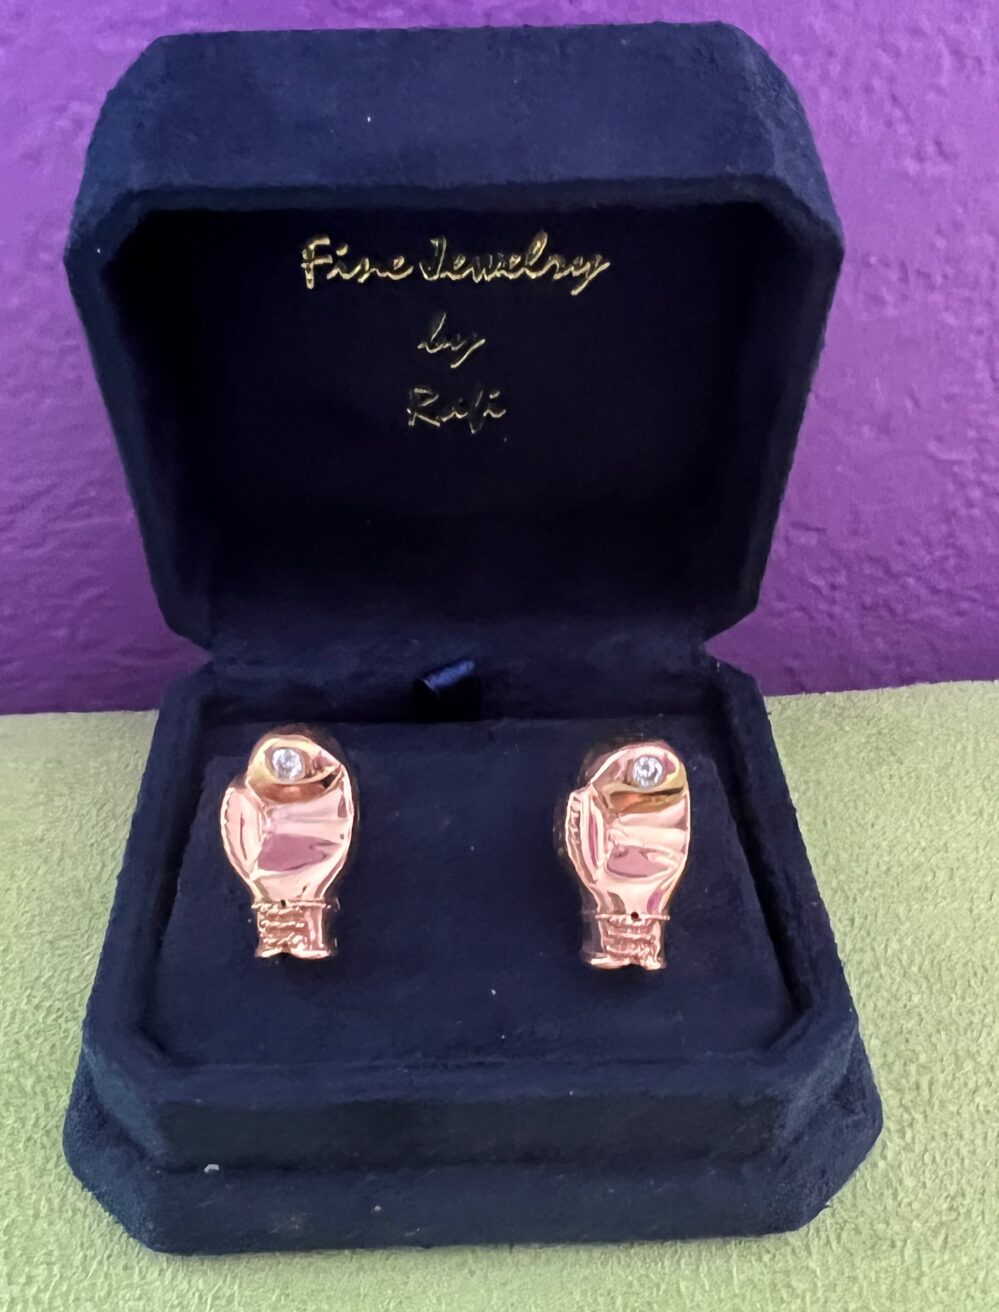 Sylvester Stallone Original 18K Solid Gold with Diamonds Boxing Glove Cufflinks